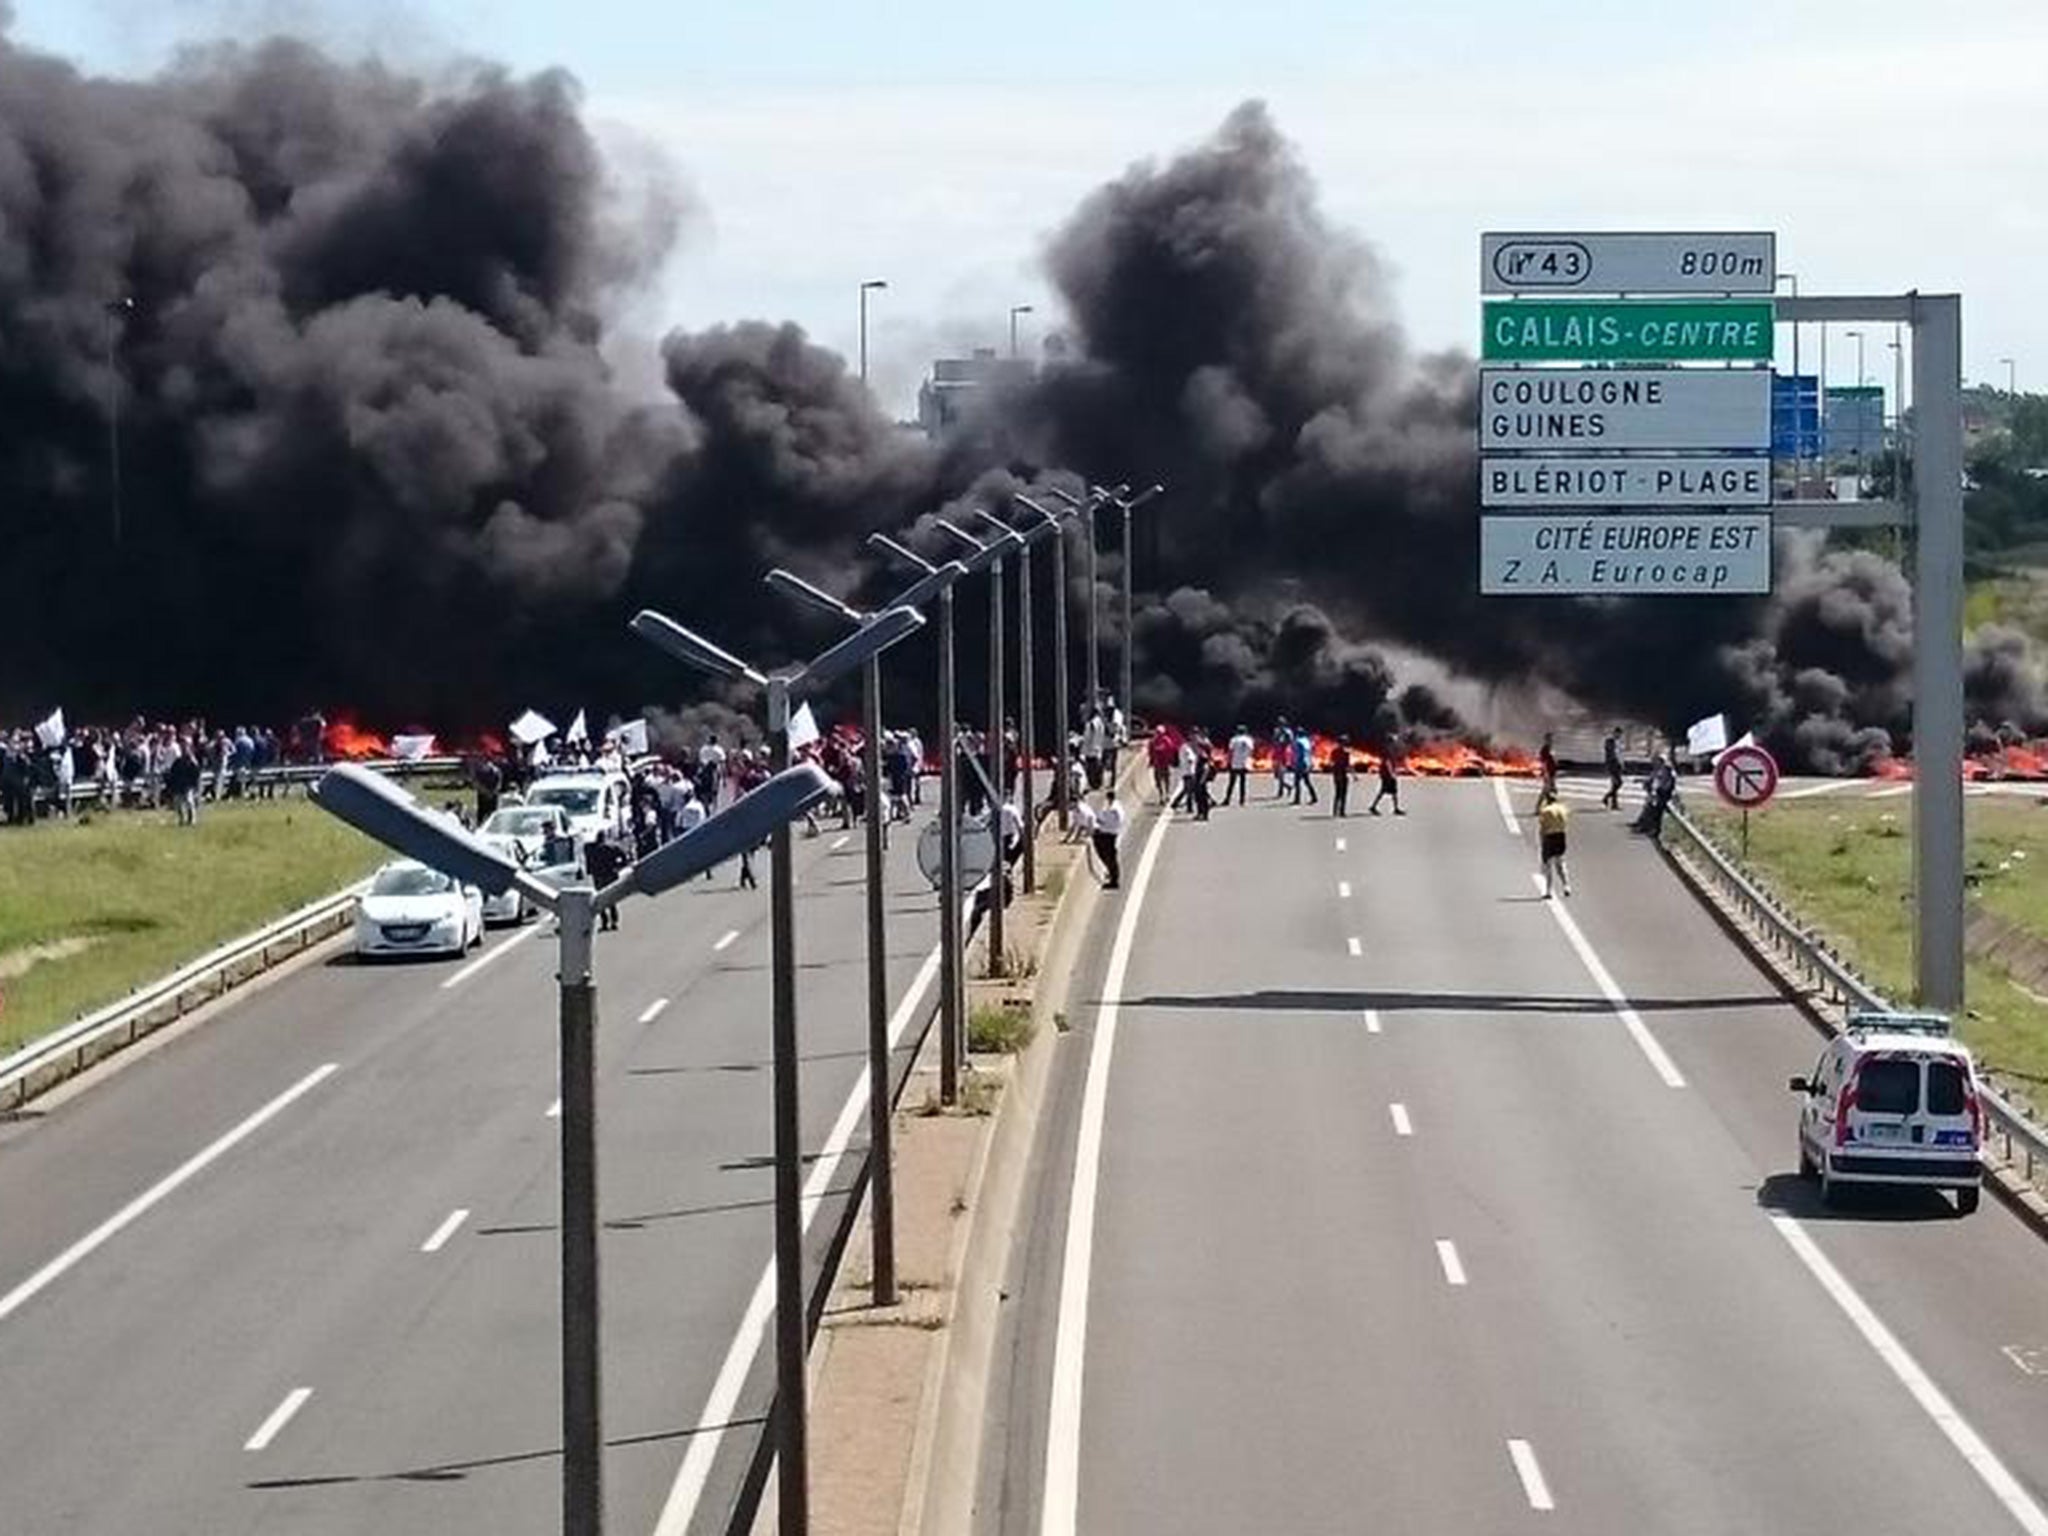 Smoke rises from where ferry workers reportedly burned tyres as they blocked access to Calais